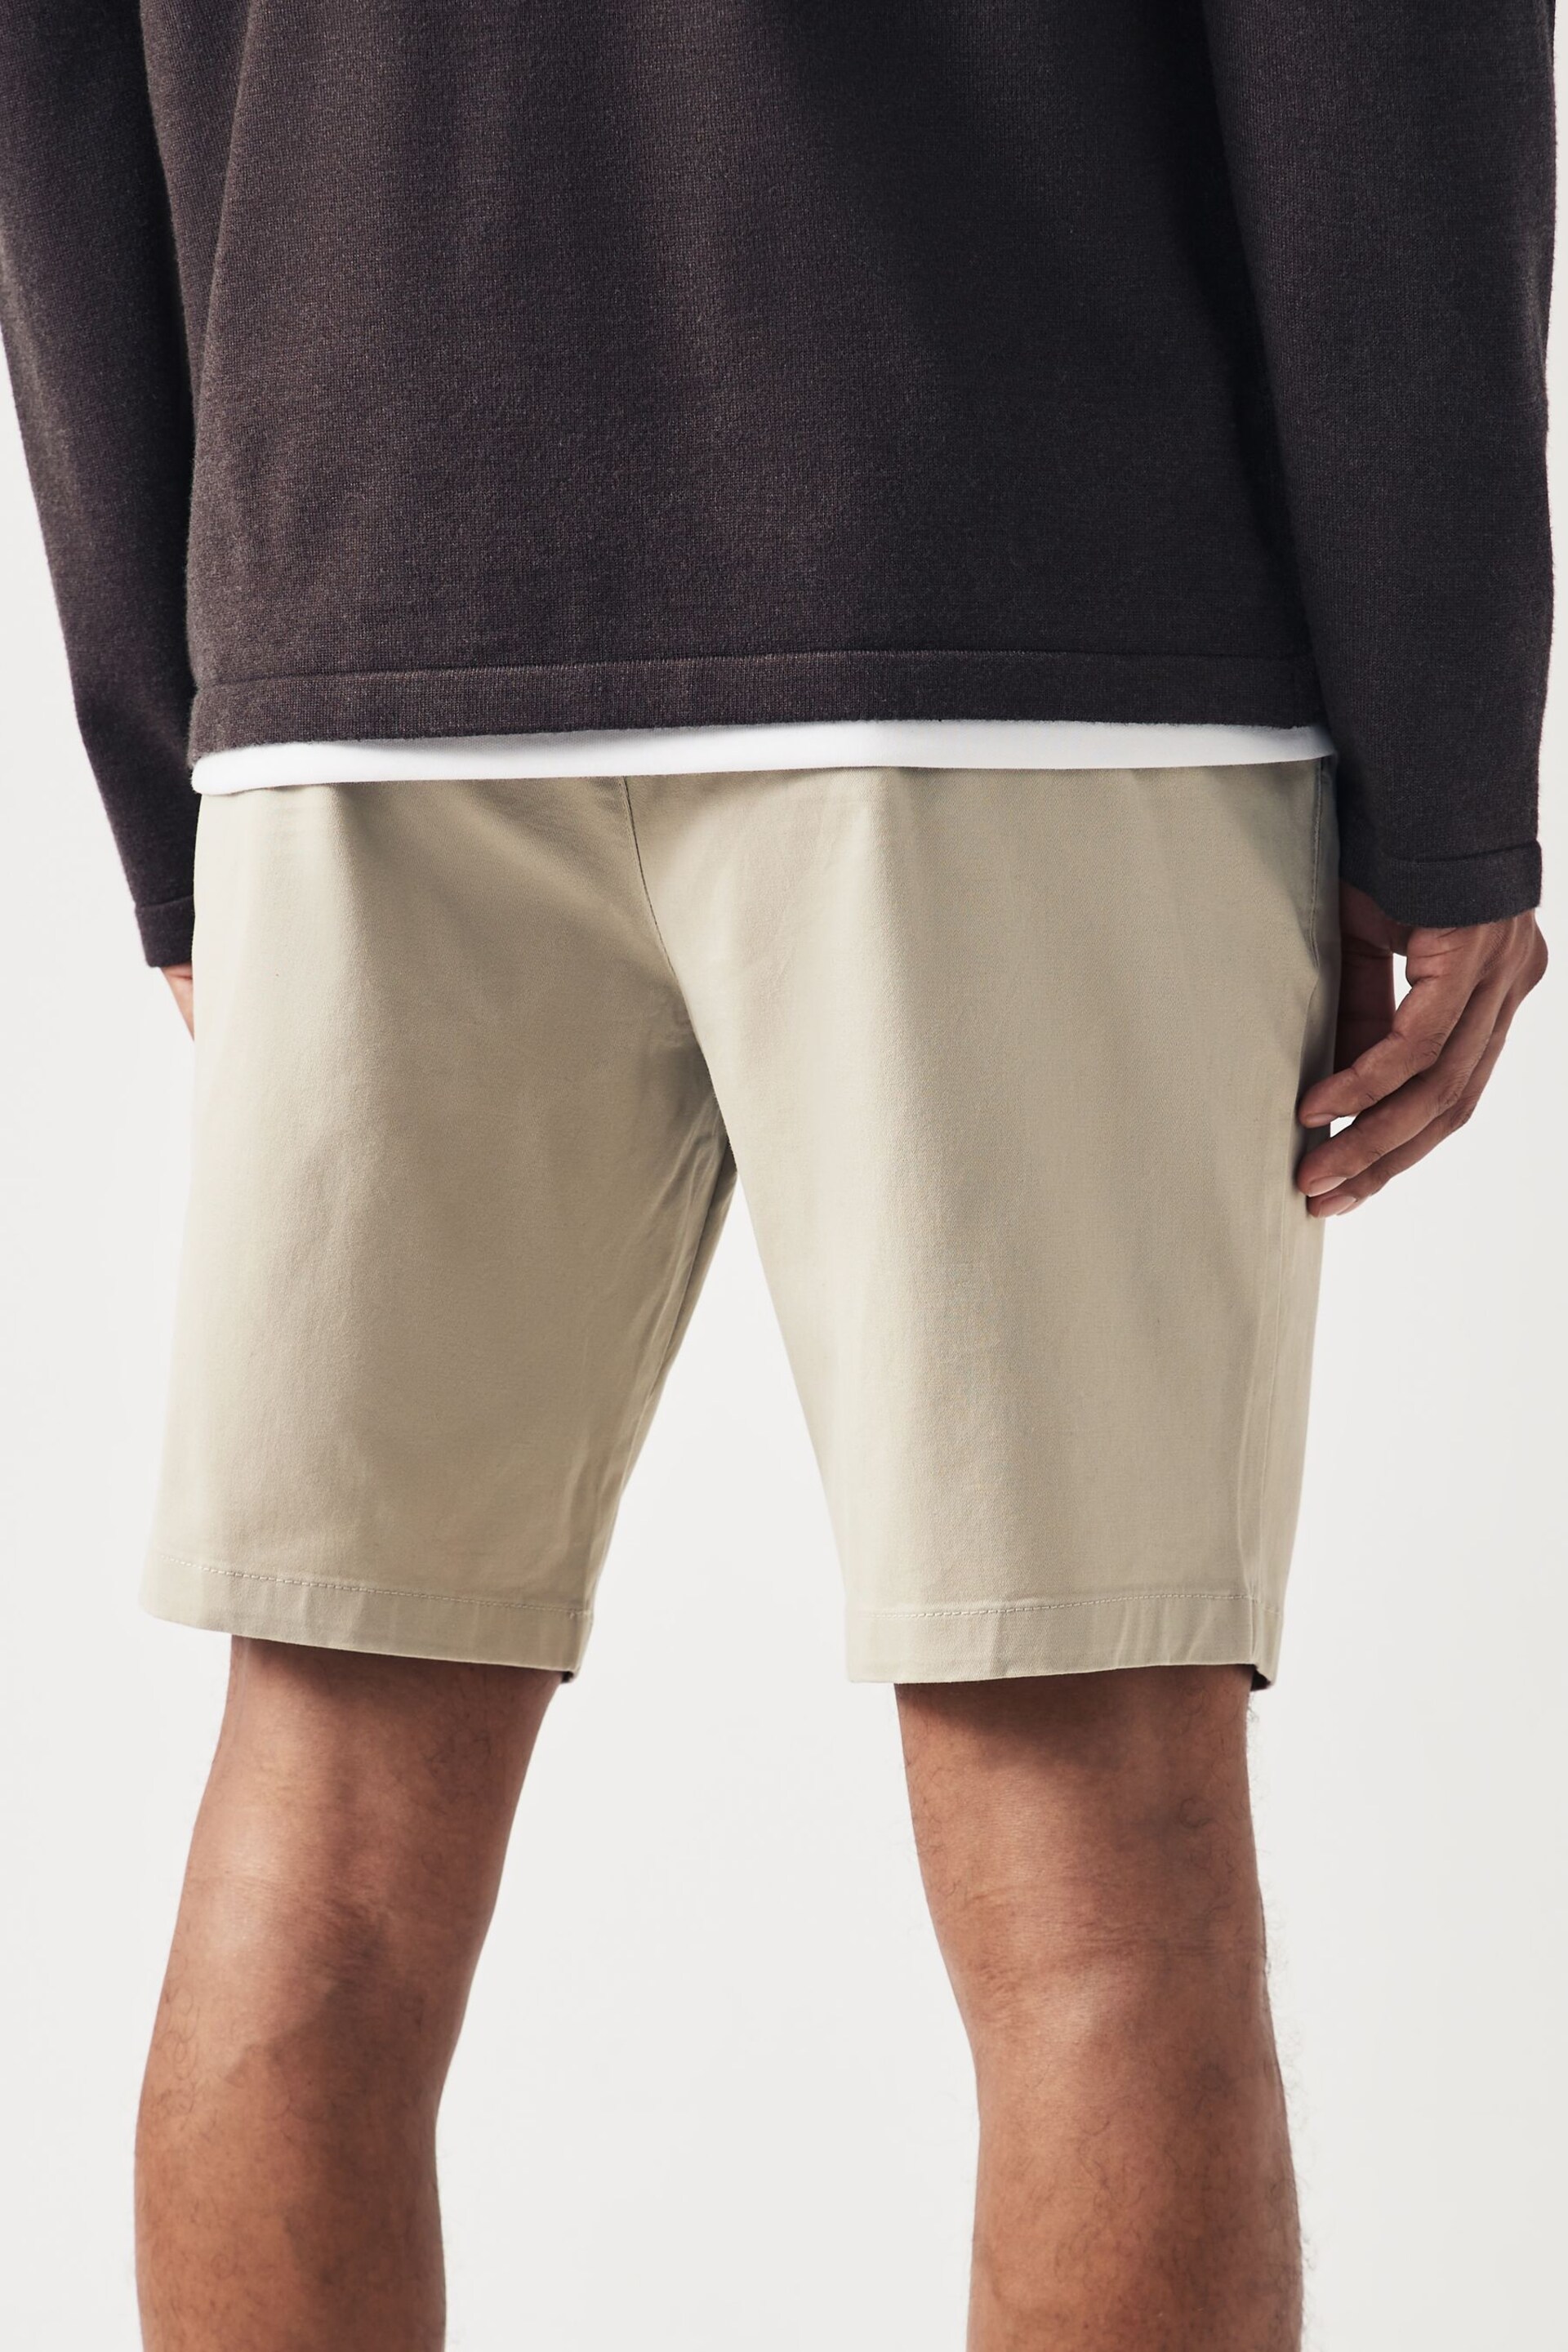 Stone Slim Fit Stretch Chinos Shorts - Image 3 of 9